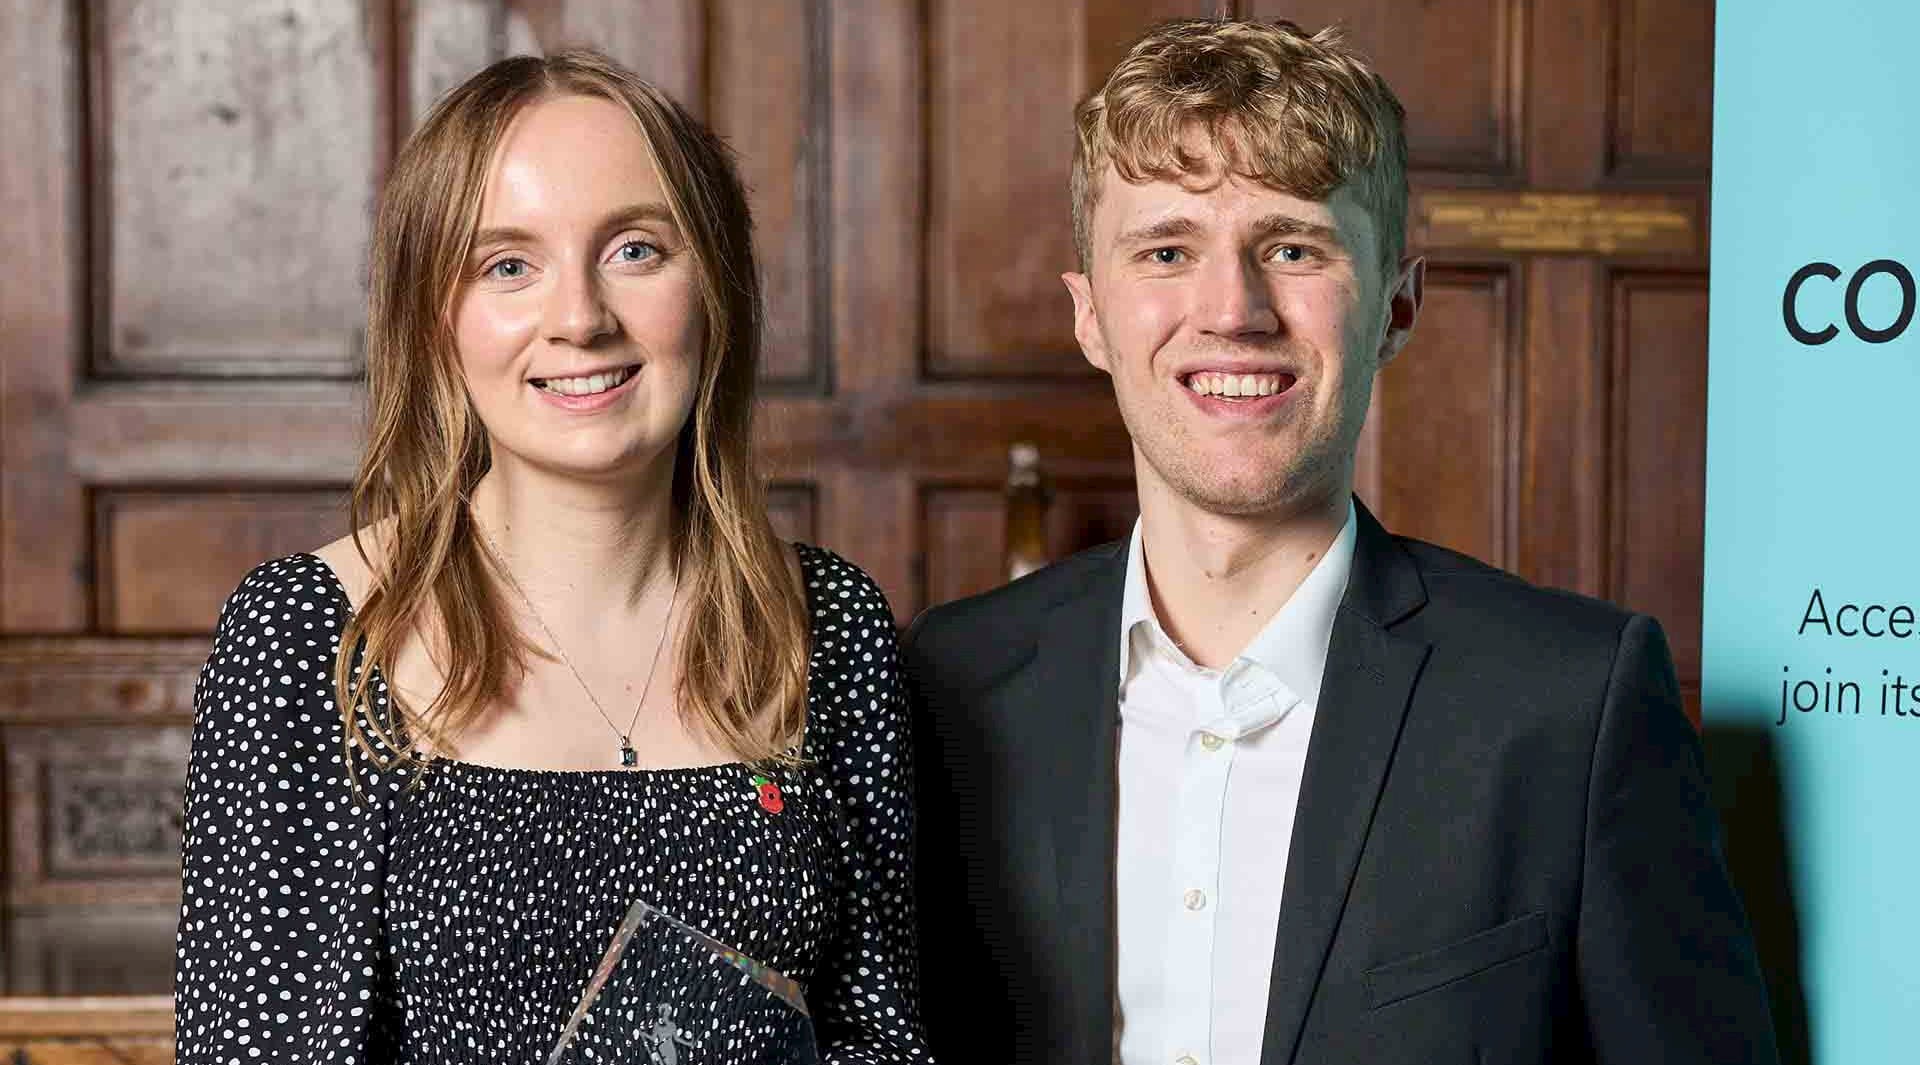 Joyce Chadwick, London-based associate in Evelyn’s valuations and modelling team, Alexander Cook, Birmingham-based associate in Evelyn’s valuations team, The Diploma in Corporate Finance winners